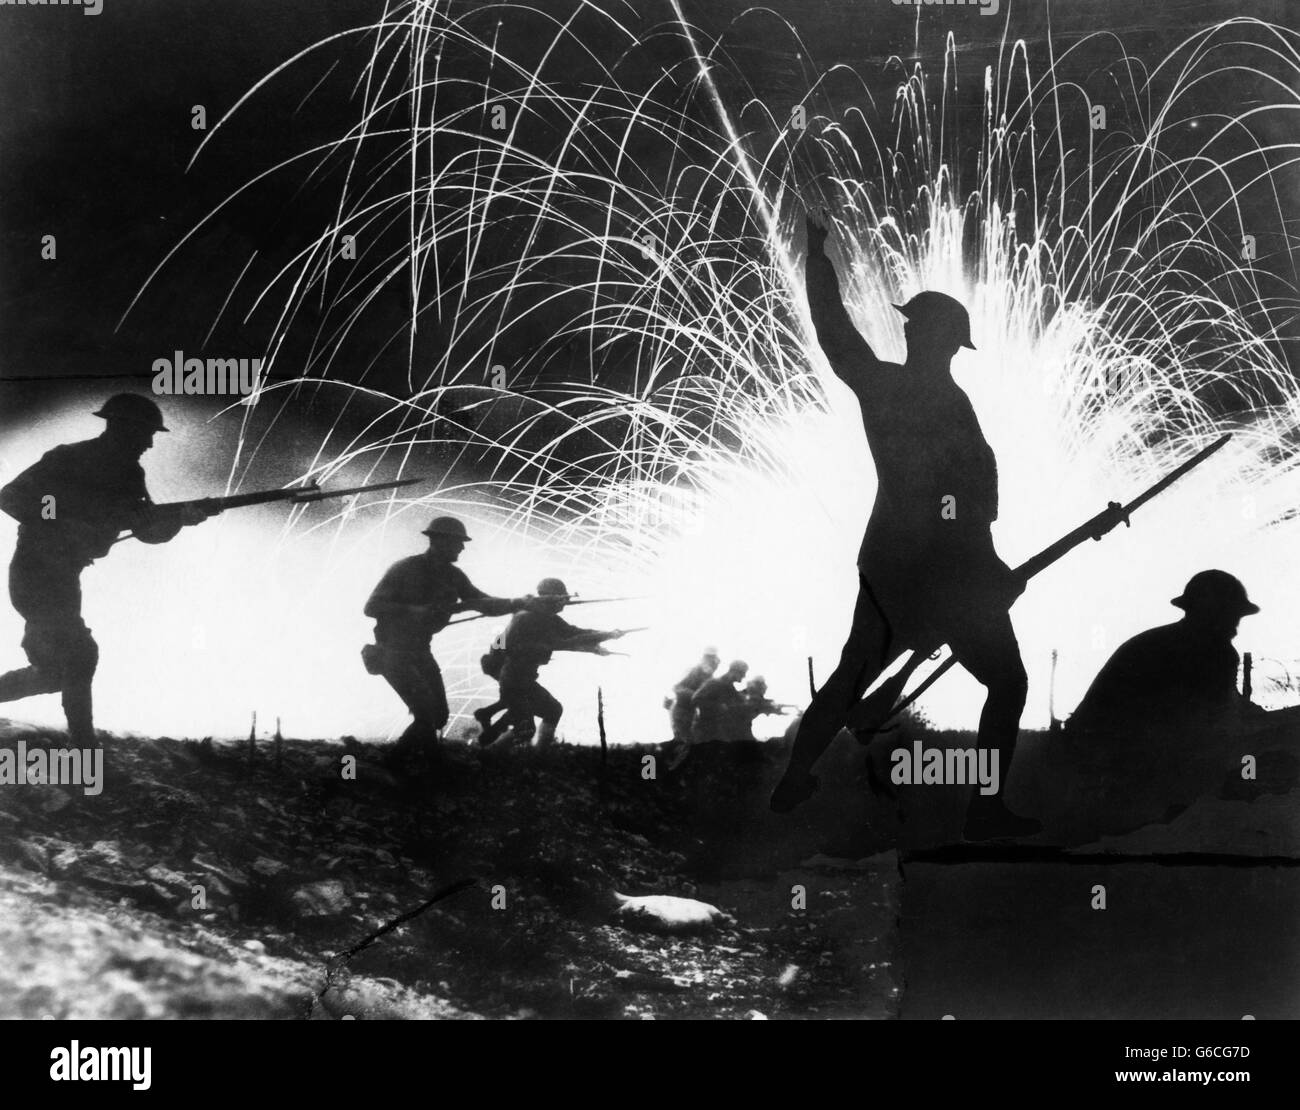 1910s 1918 WORLD WAR I ANONYMOUS SILHOUETTED AMERICAN EXPEDITIONARY FORCE SOLDIERS WITH FIXED BAYONETS CHARGING IN NIGHT BATTLE Stock Photo